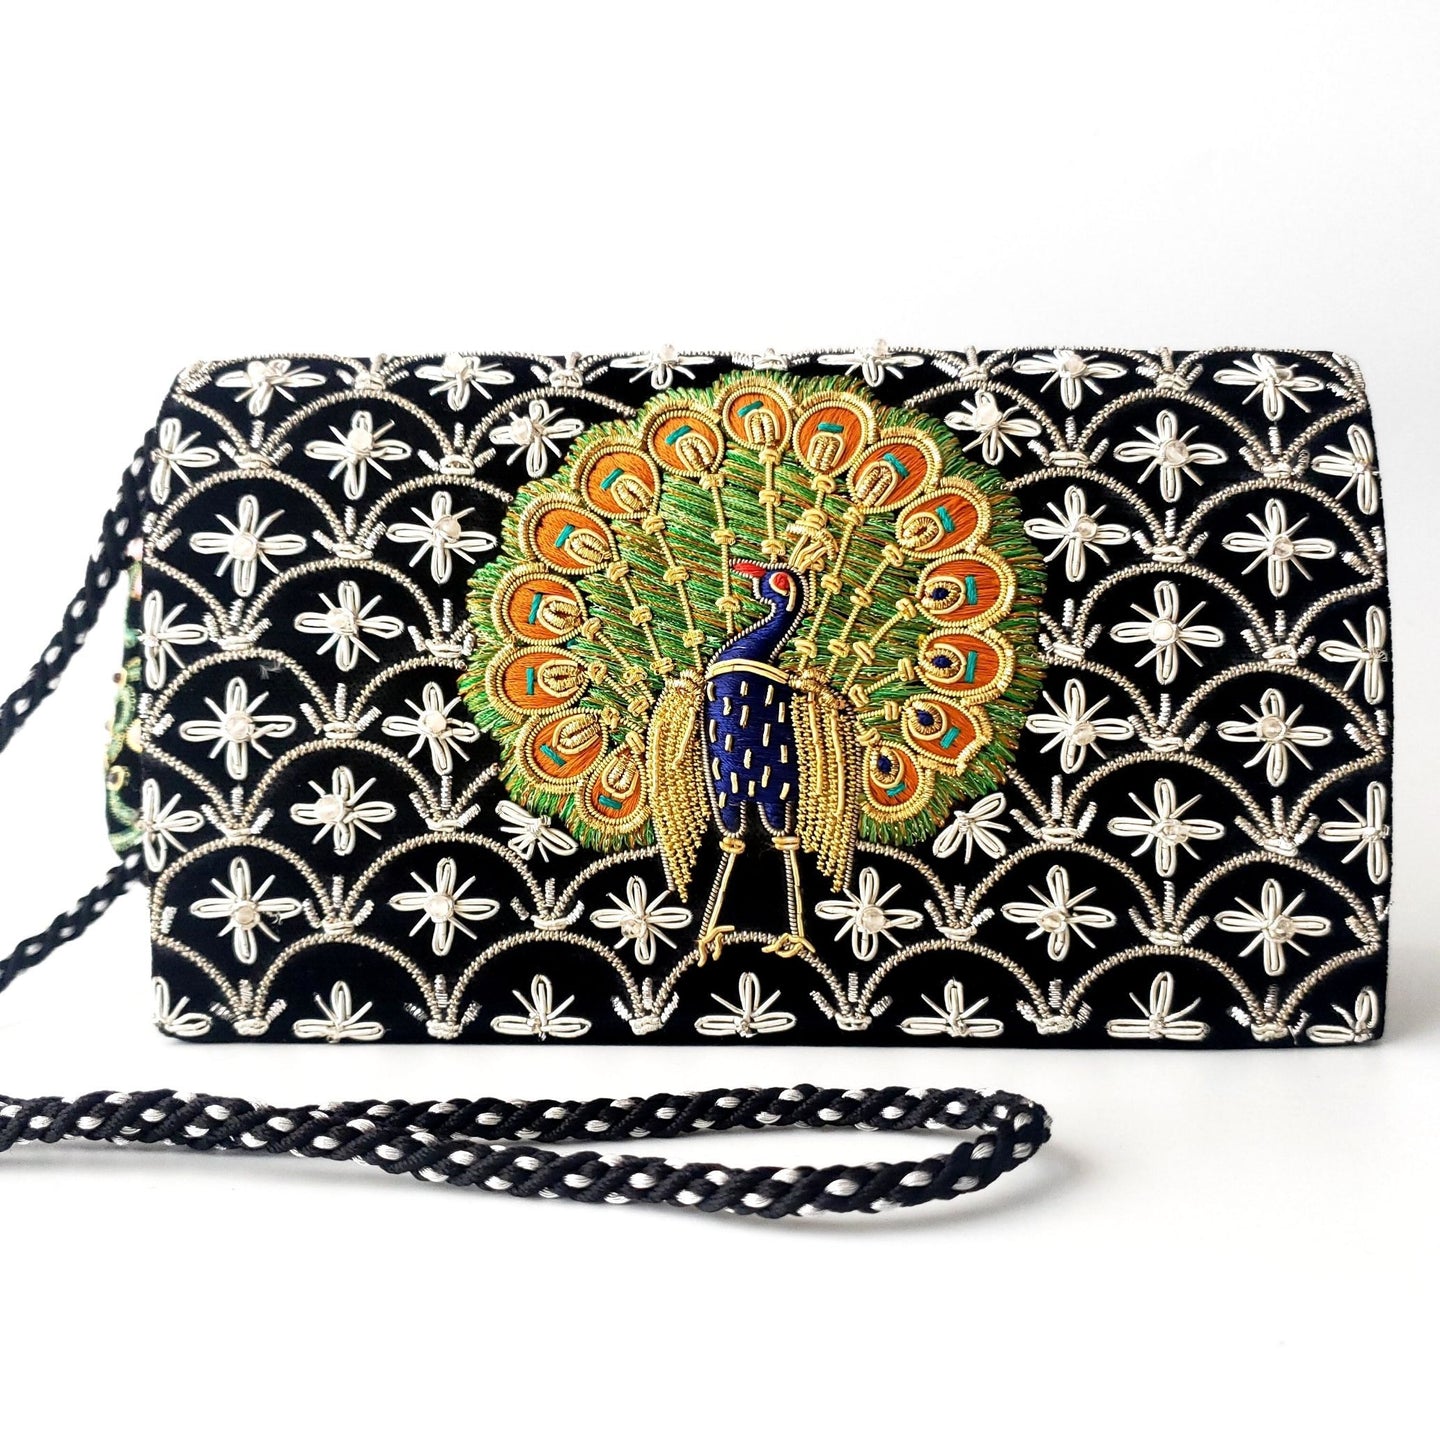 Vintage inspired embroidered peacock clutch bag with goldwork, zardozi bag.